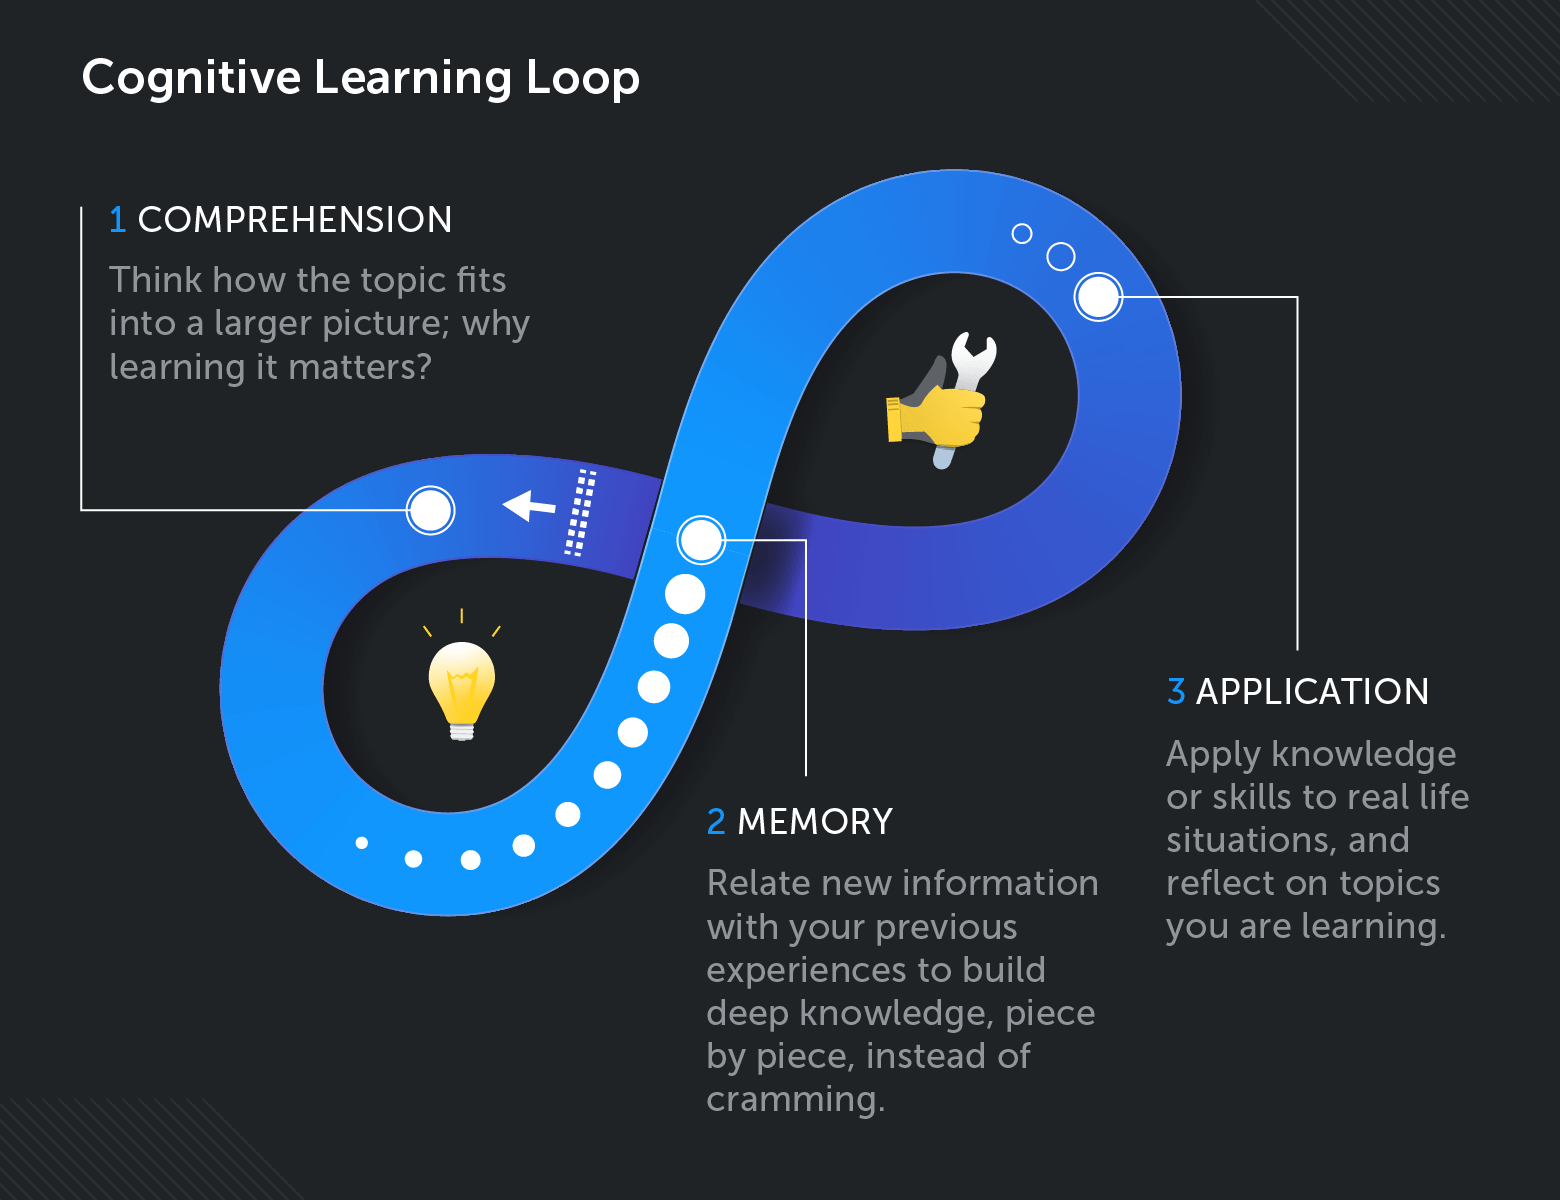 Cognitive learning loop, fundamental aspects: Comprehension, Memory, Application.